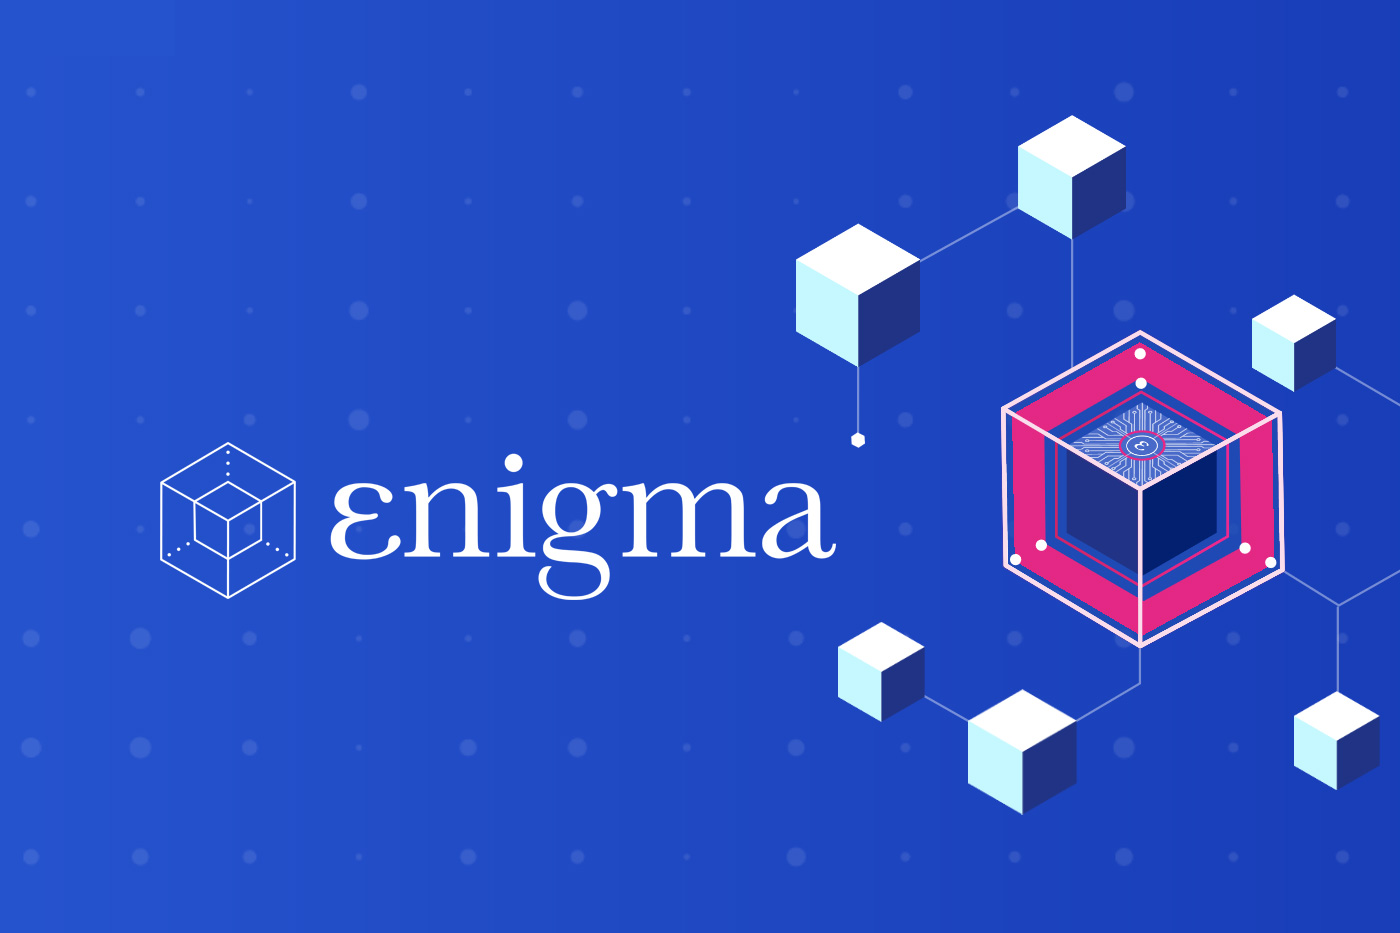 What is Enigma?